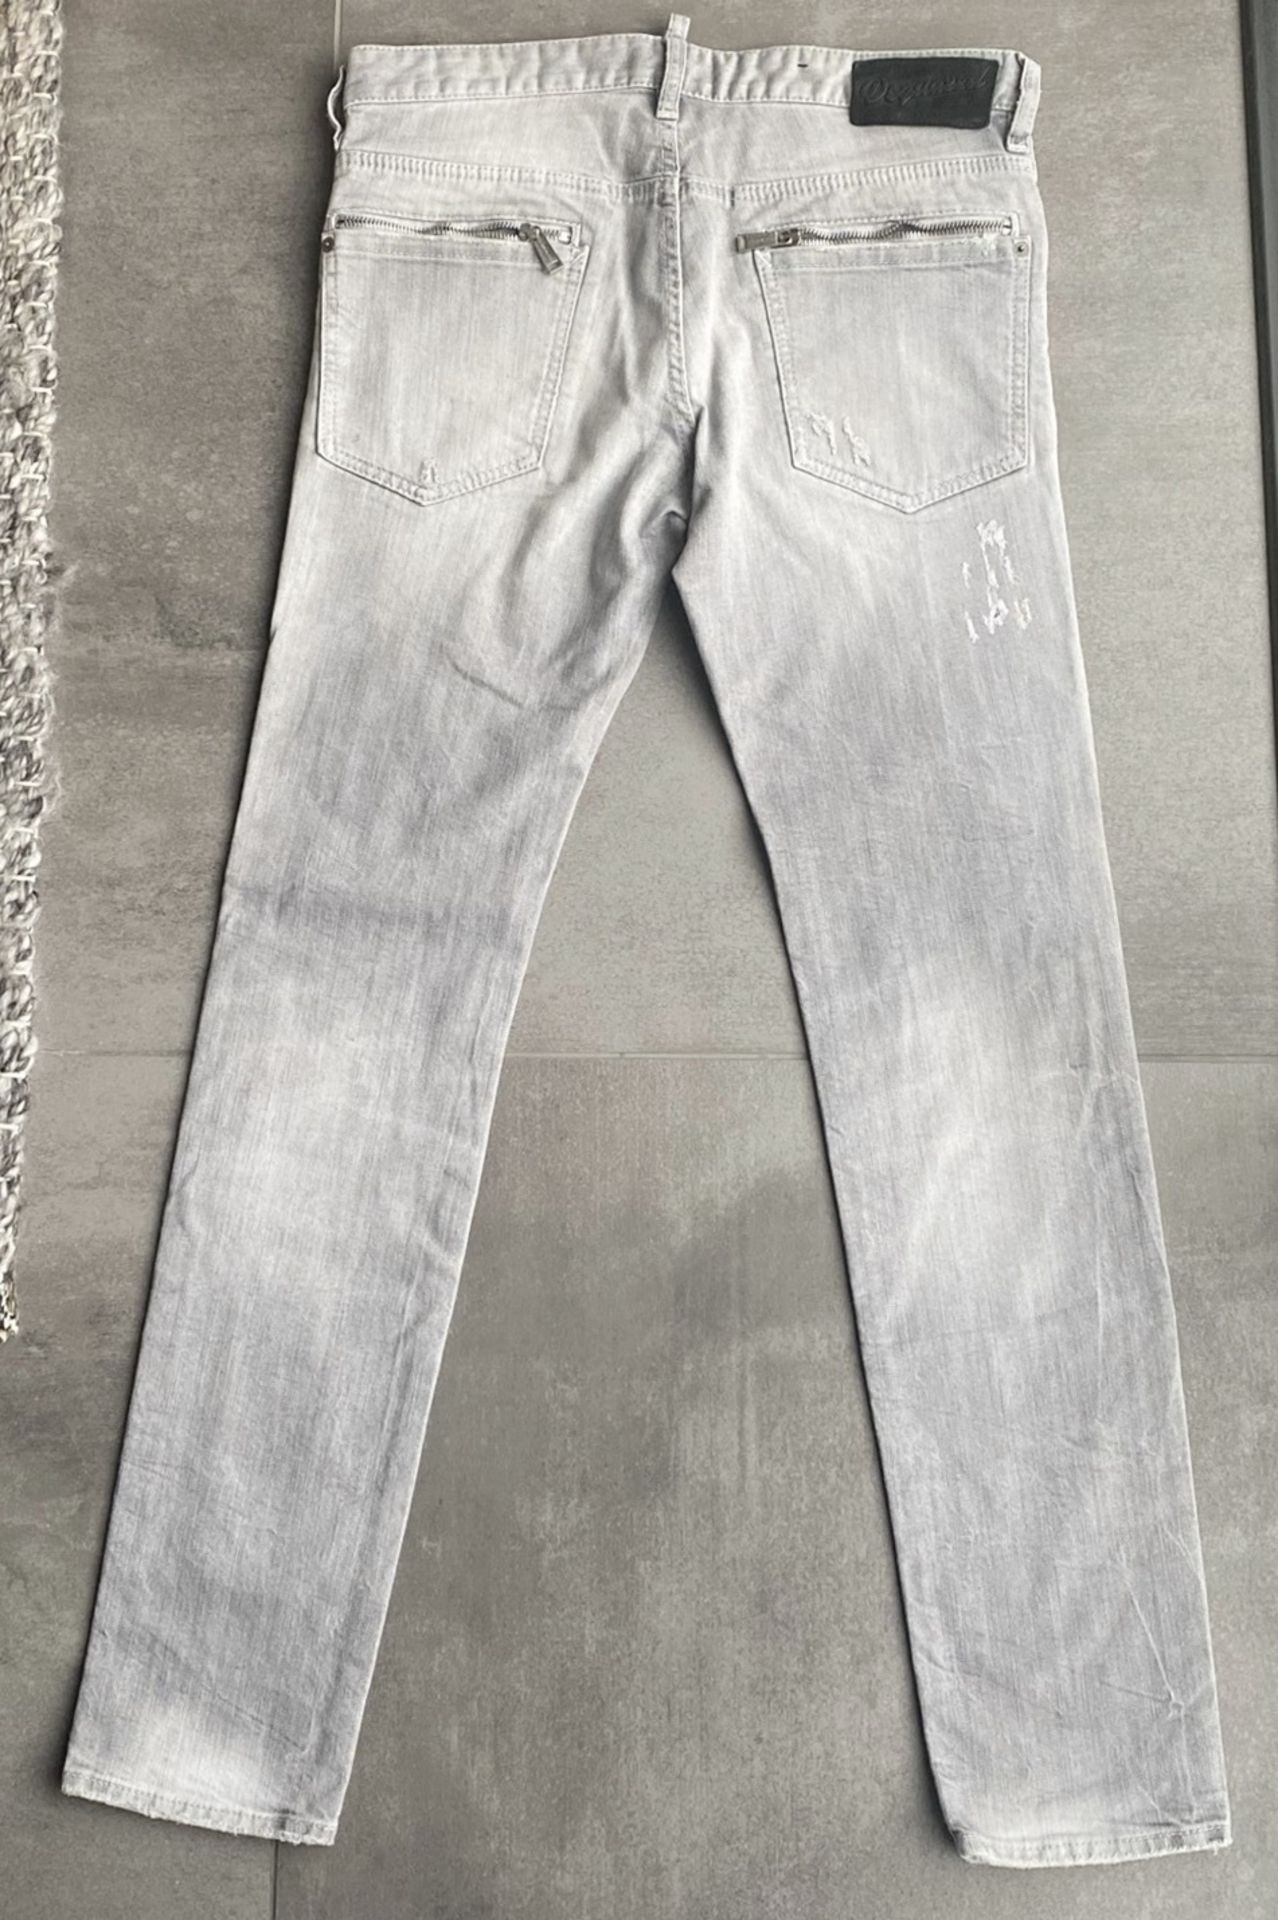 1 x Pair Of Men's Genuine Dsquared2 Designer Jeans In Grey - Waist Size: UK 32 / Italy 48 - Image 5 of 8